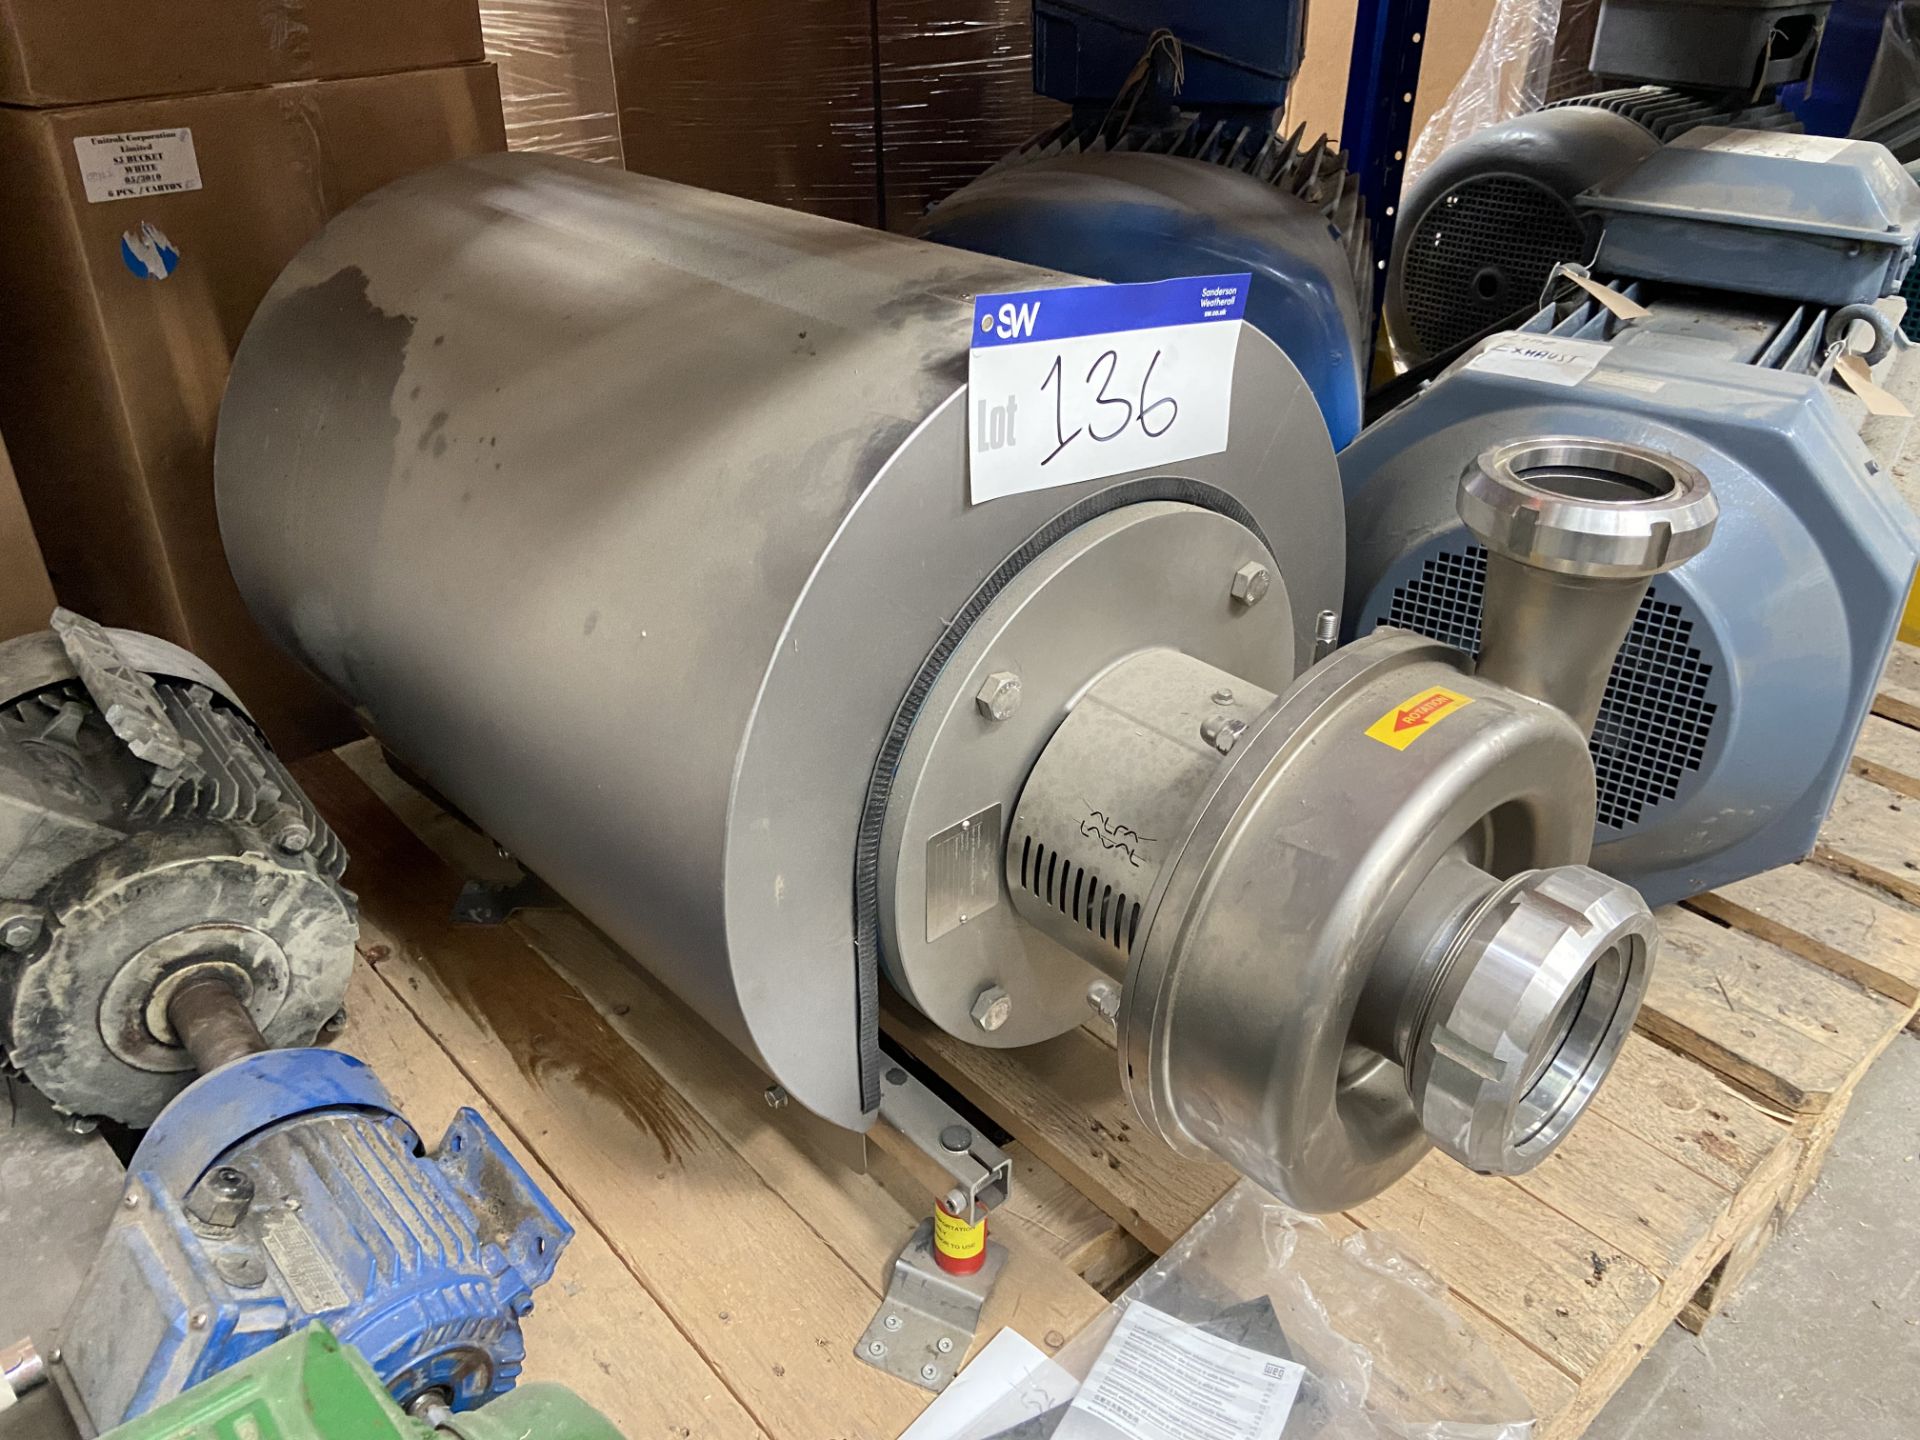 Alfa Laval LKH45 Stainless Steel Cased Pump, lot located in Bretherton, Lancashire, lot loaded